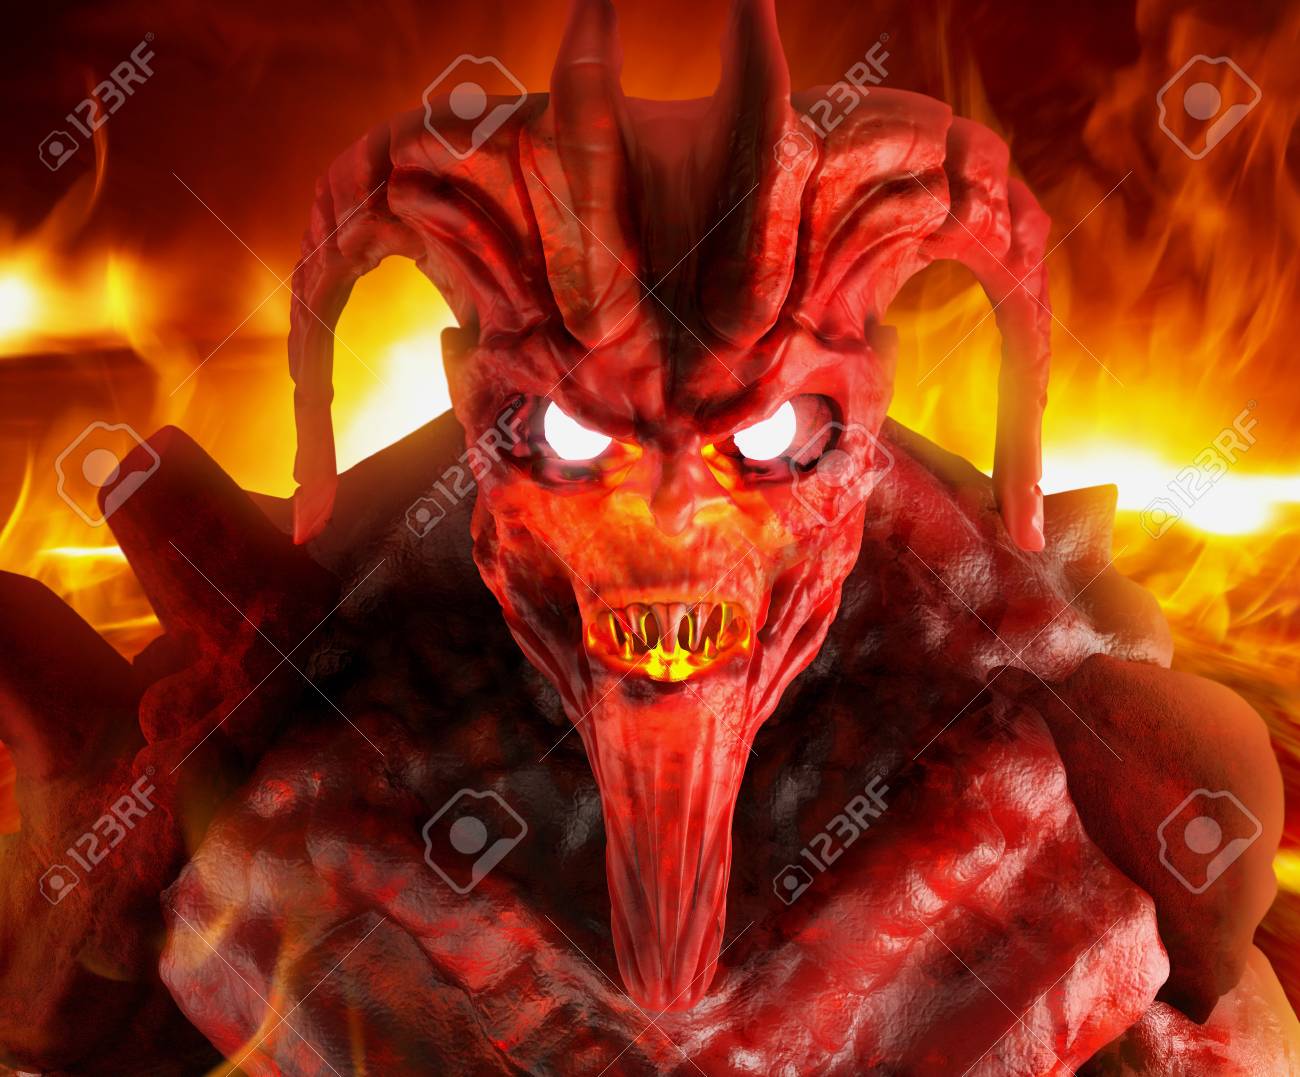 Artwork Of A Hellish Demon Creature Face With Glowing Eyes Close